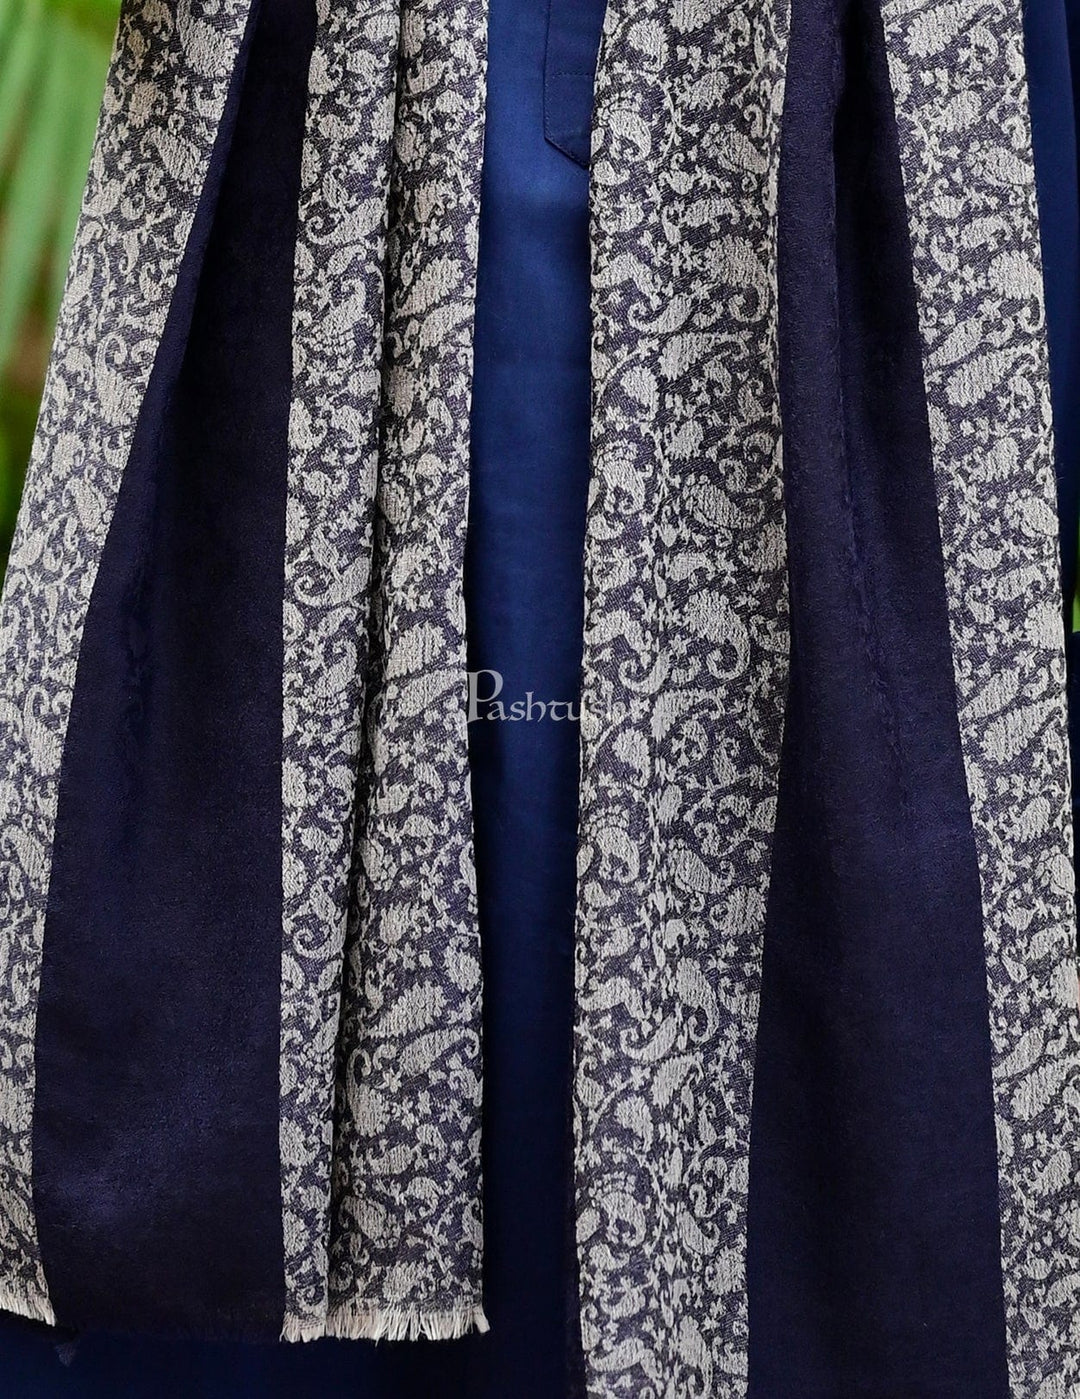 Pashtush India Gift Pack Pashtush His And Her Gift Set Of Fine Wool Stole and Embroidery Shawl With Premium Gift Box Packaging, Navy Blue and Majenta